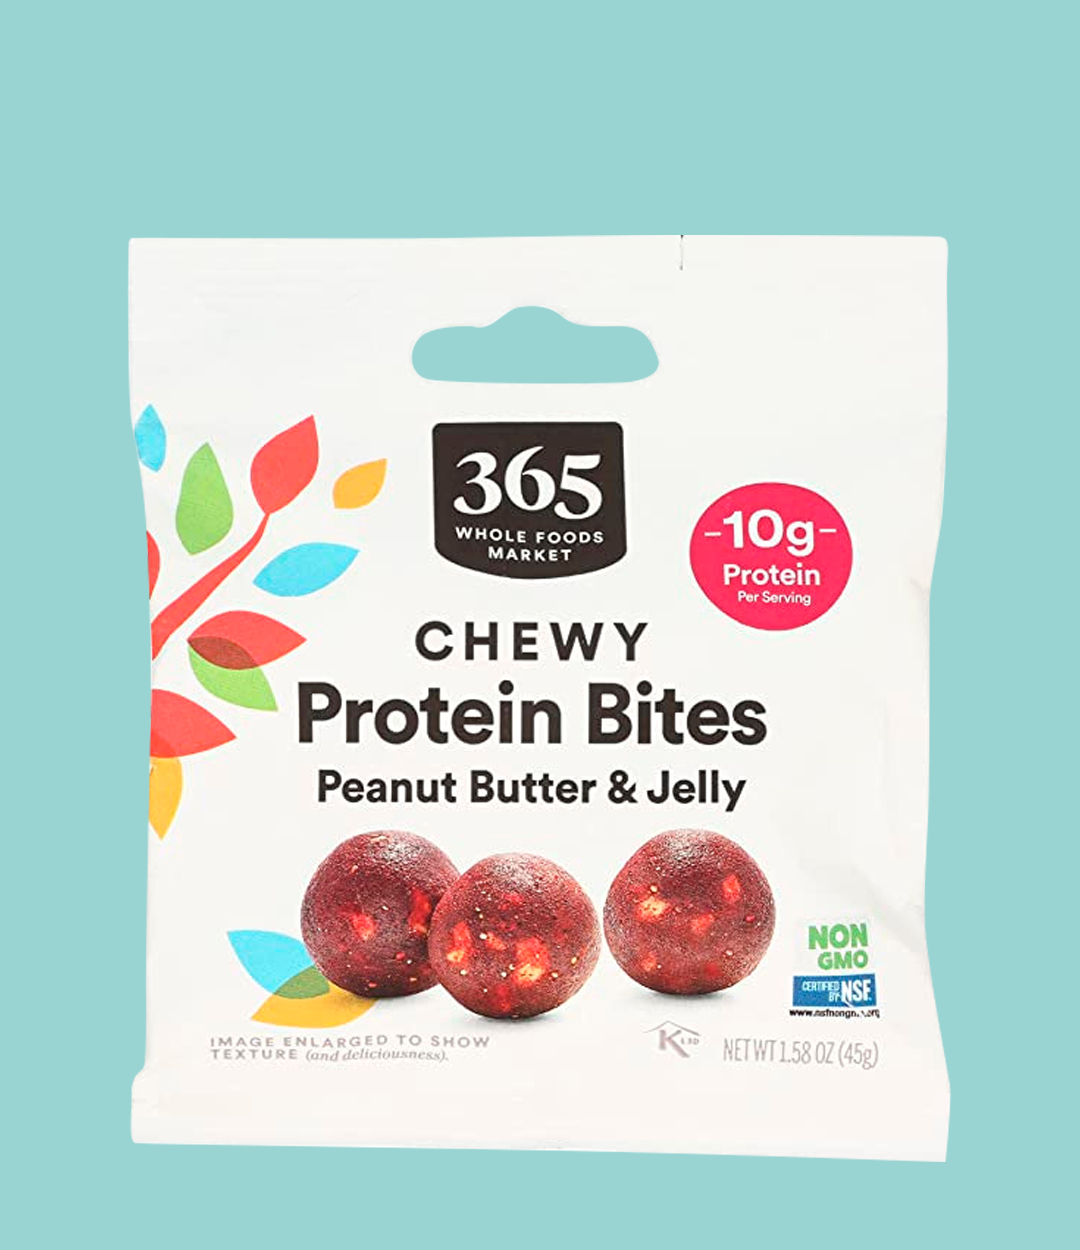 Chewy Protein Bites, Peanut Butter & Jelly